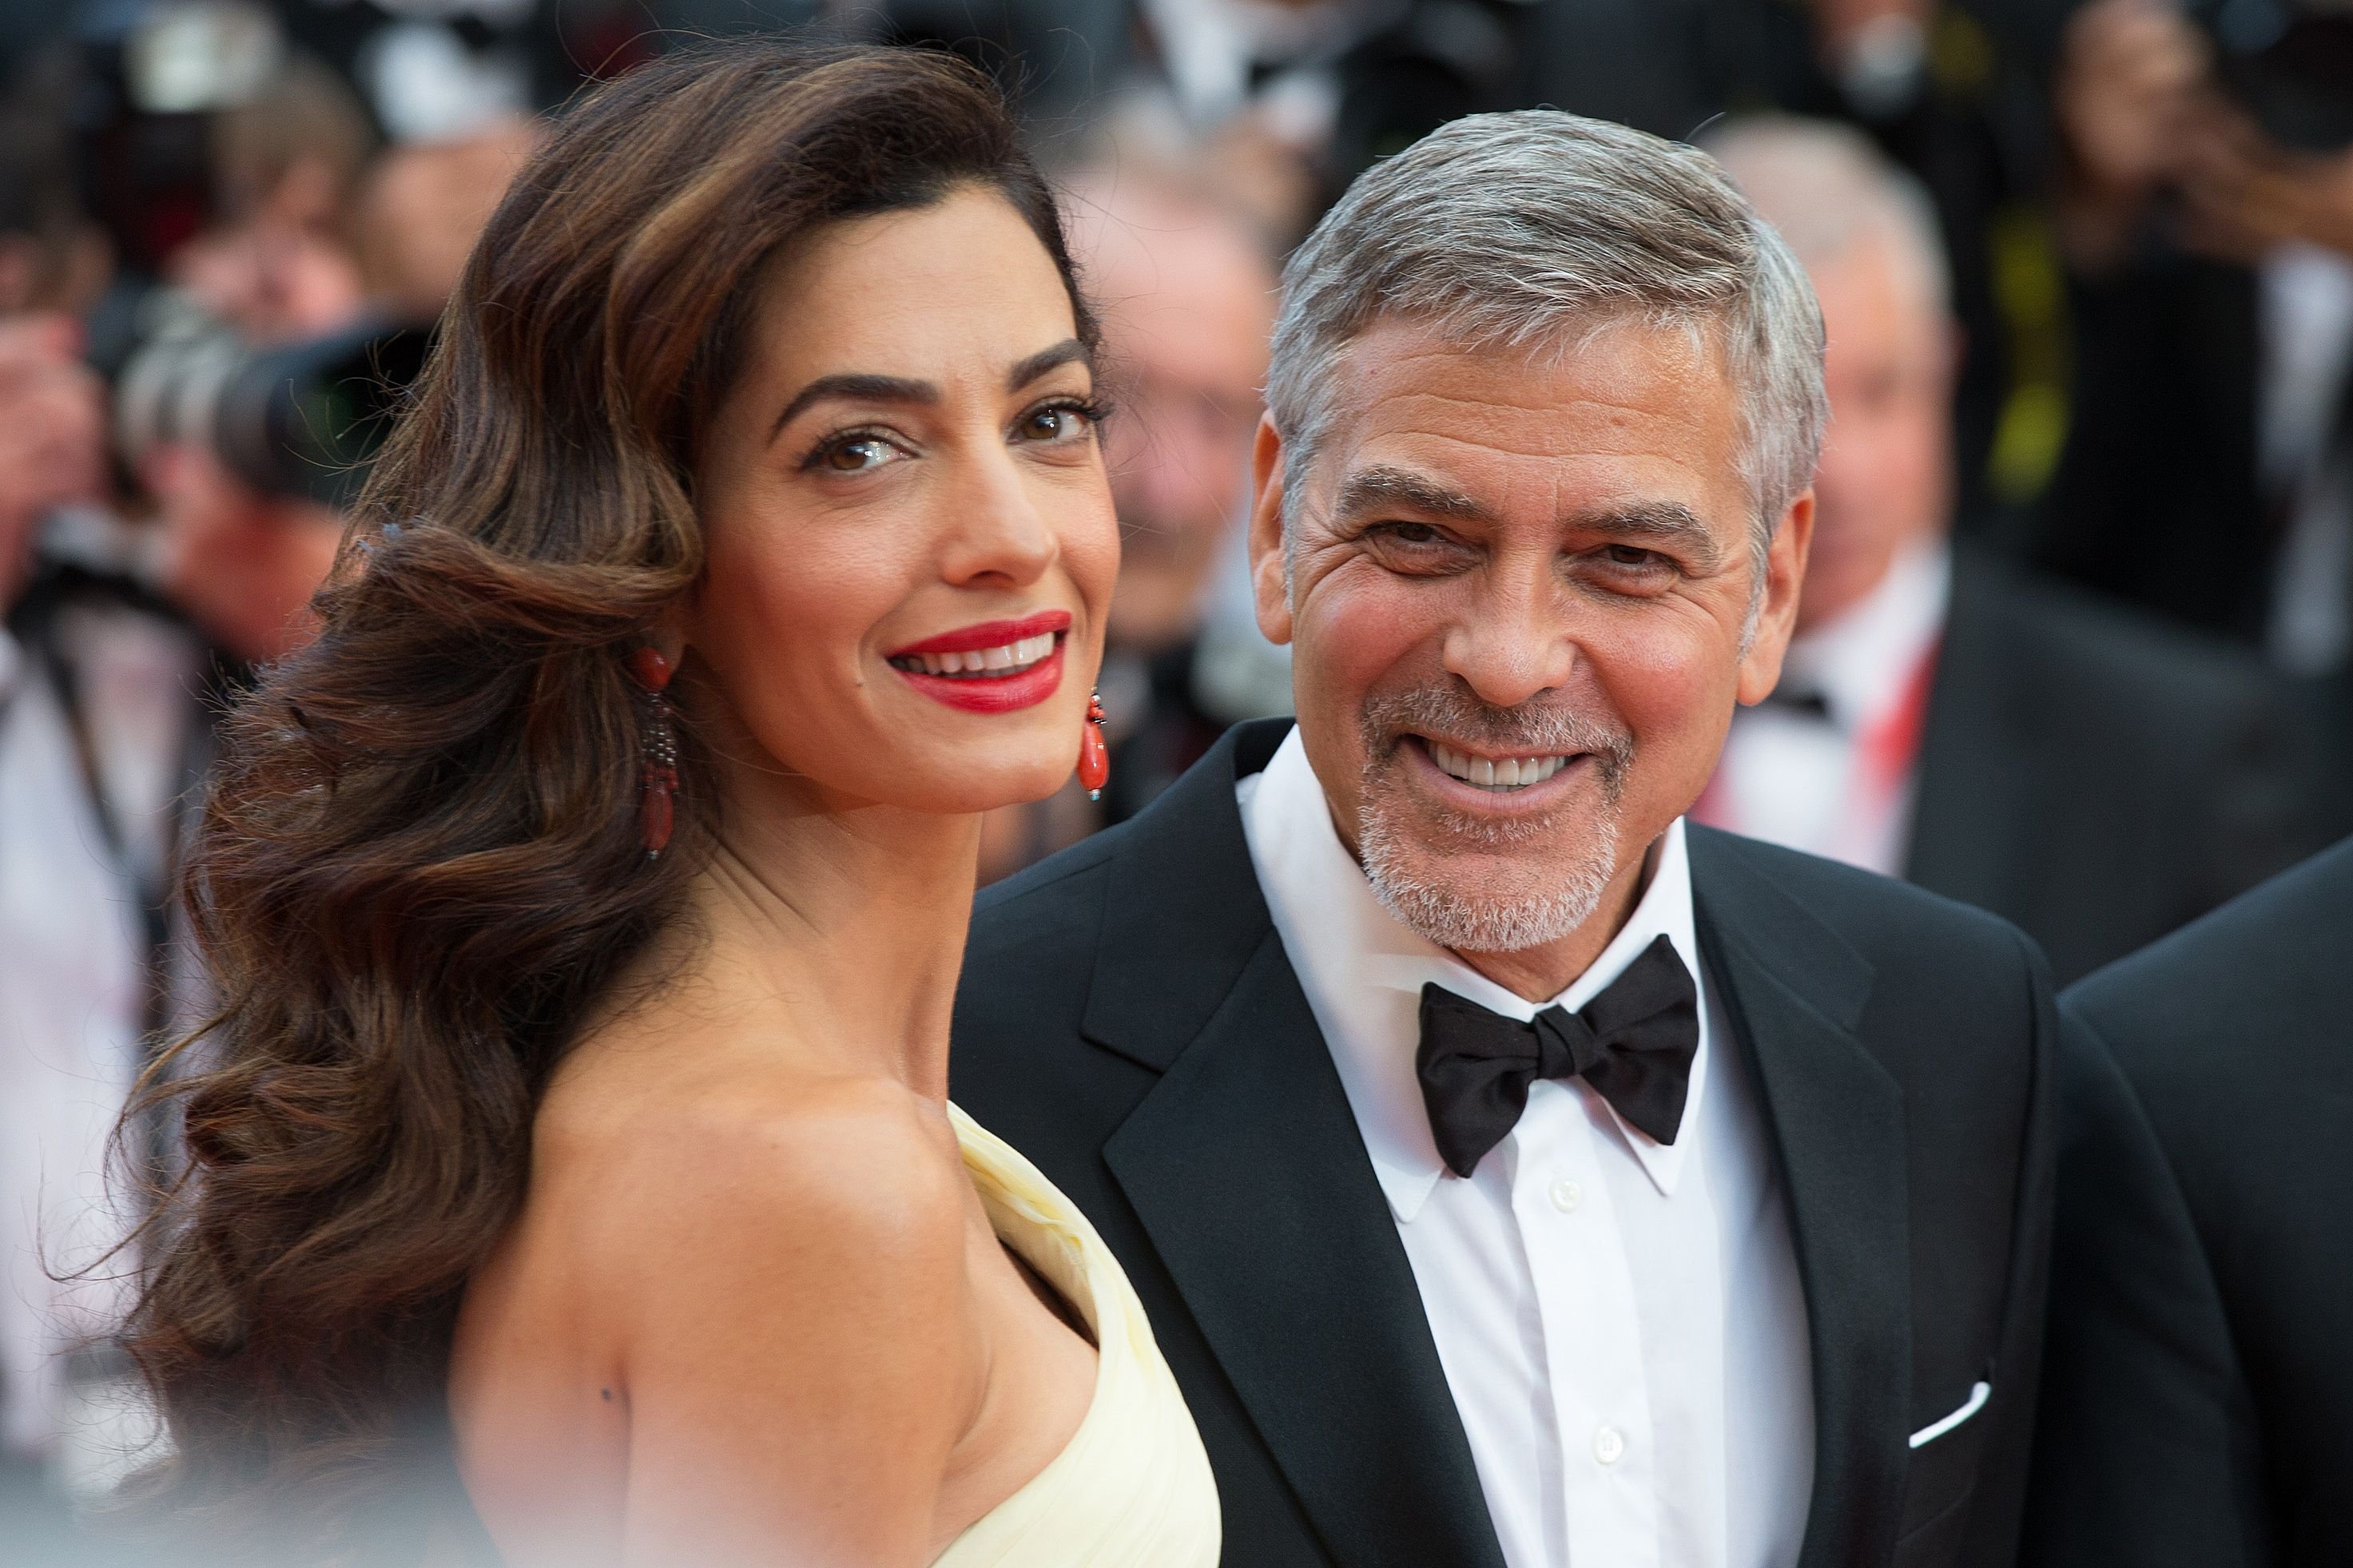 George and Amal Clooney at the 2016 Cannes Film Festival for the screening of "Money Monster.” | Photo: Shutterstock